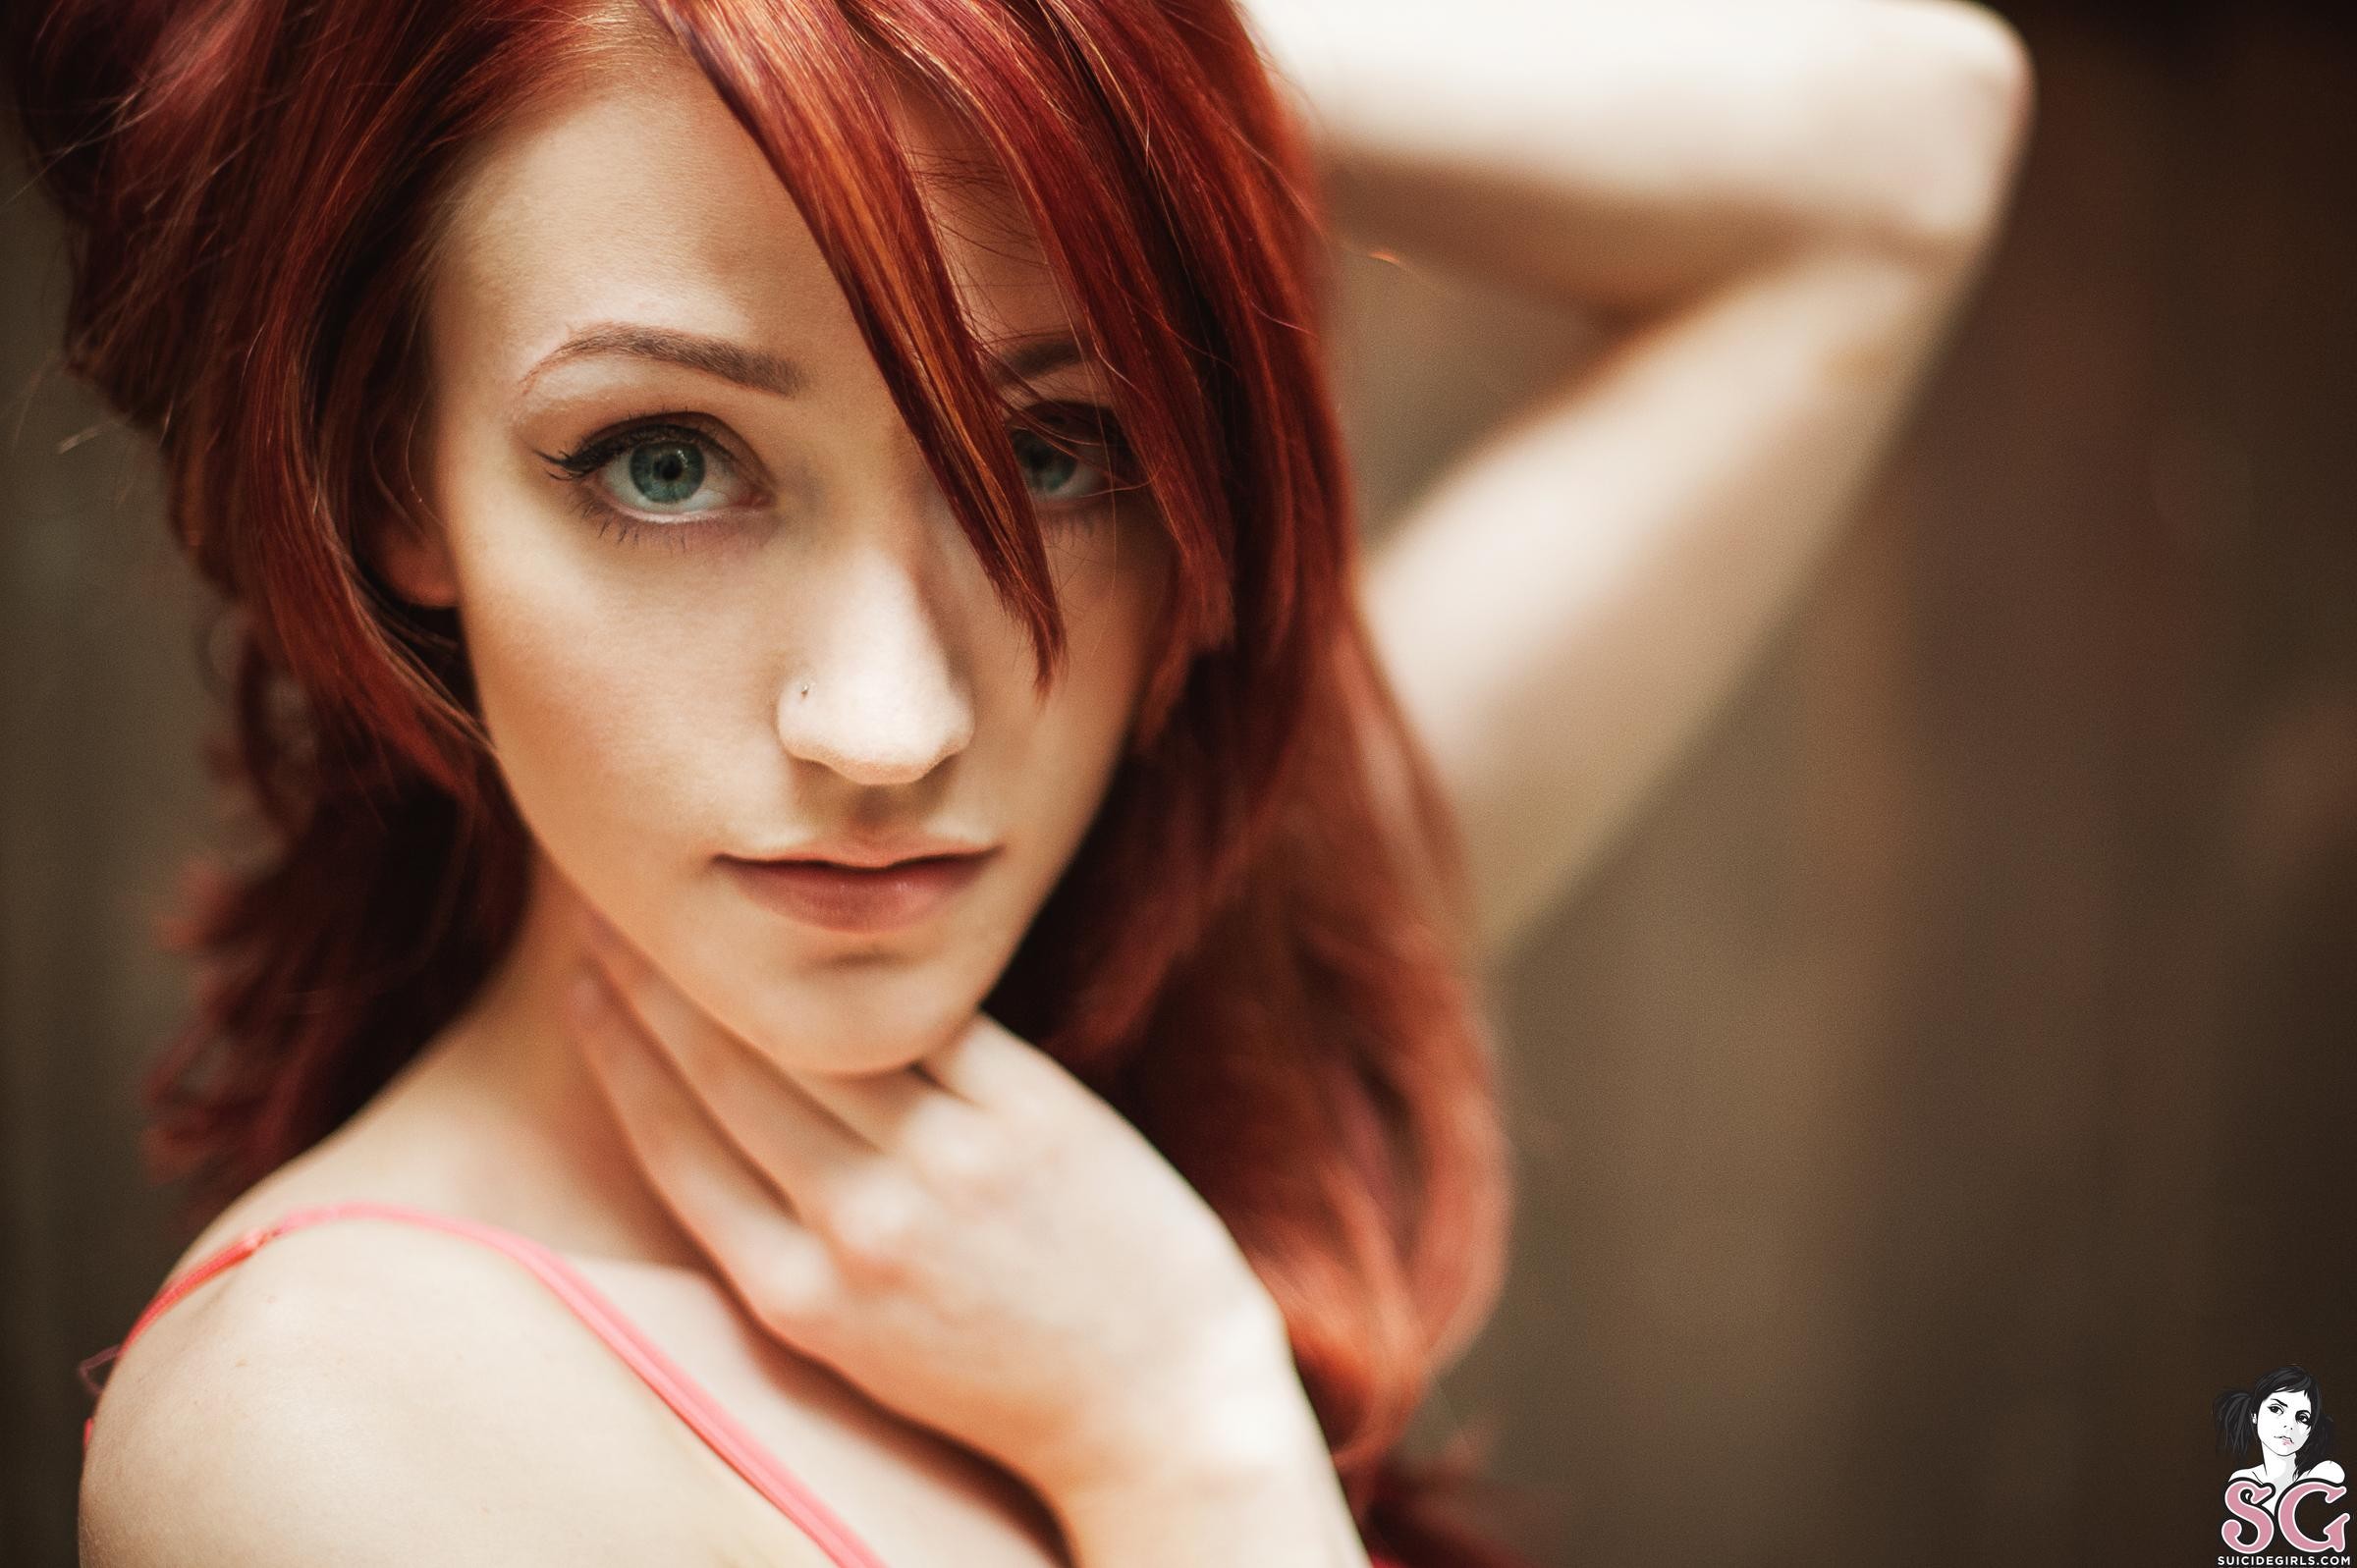 redhead suicide girls lindsay chelle women face Wallpaper